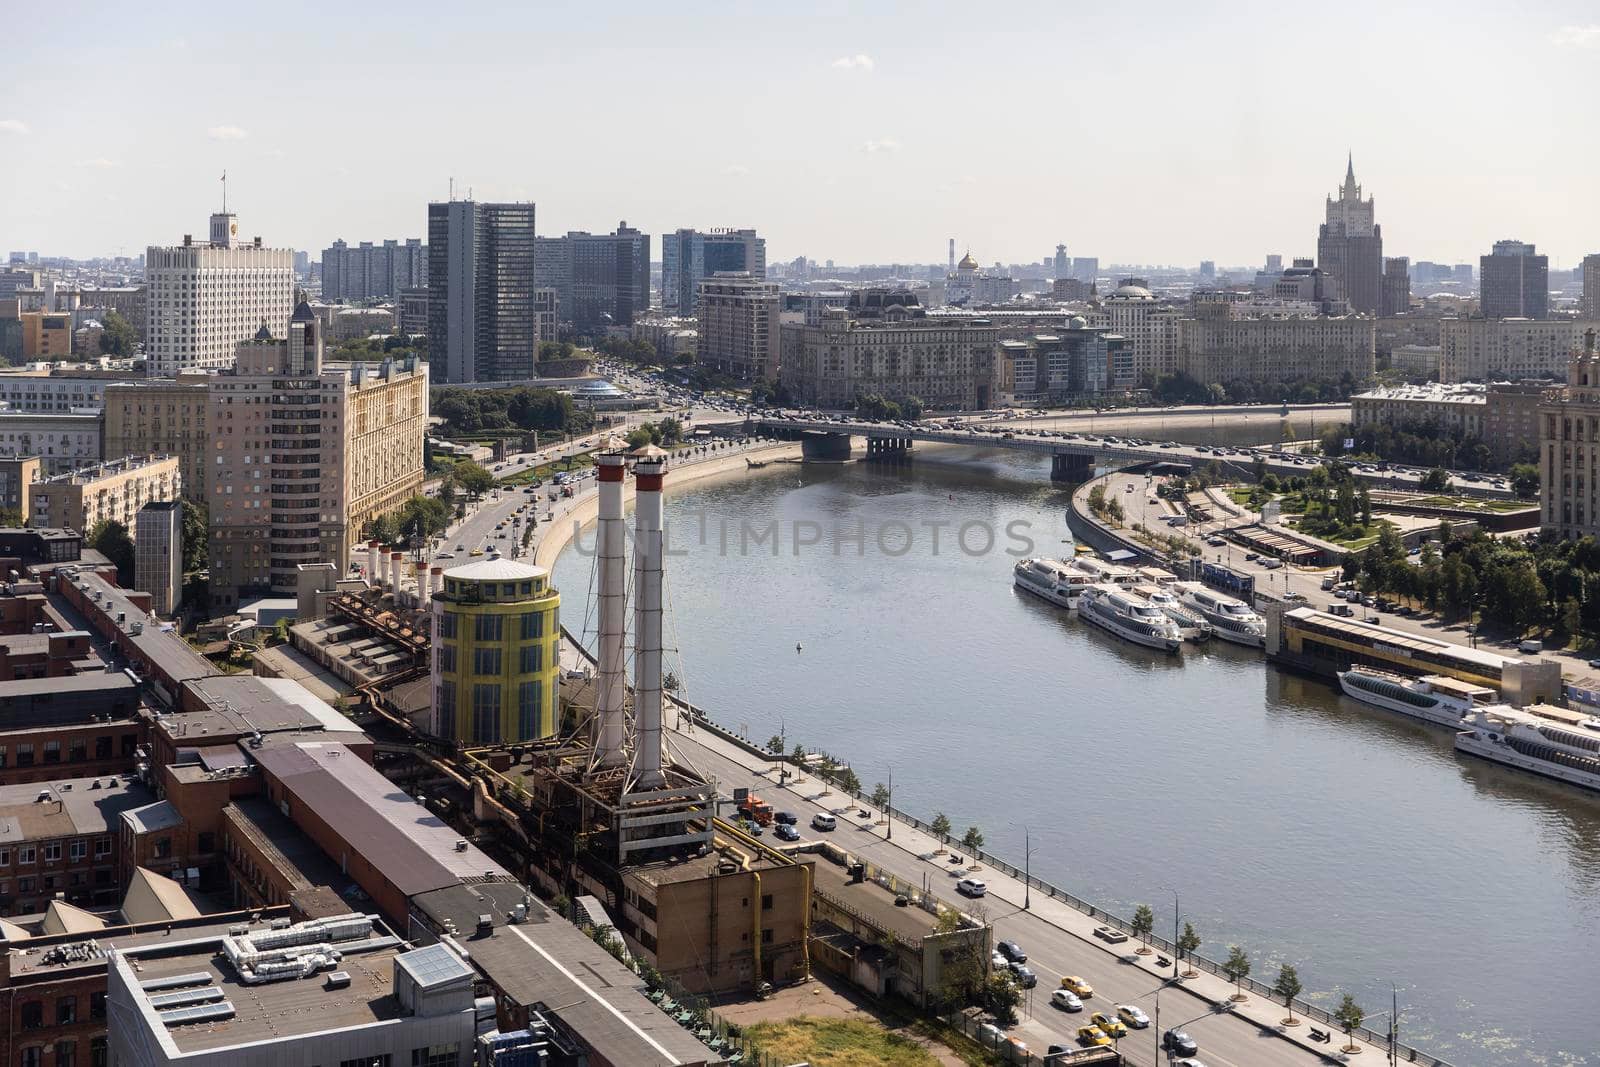 Moscow, RUSSIA - June 25, 2021: Aerial roof view on Moscow historical center from viewpoint. View from the International Trade Center, World Trade Center, by elenarostunova